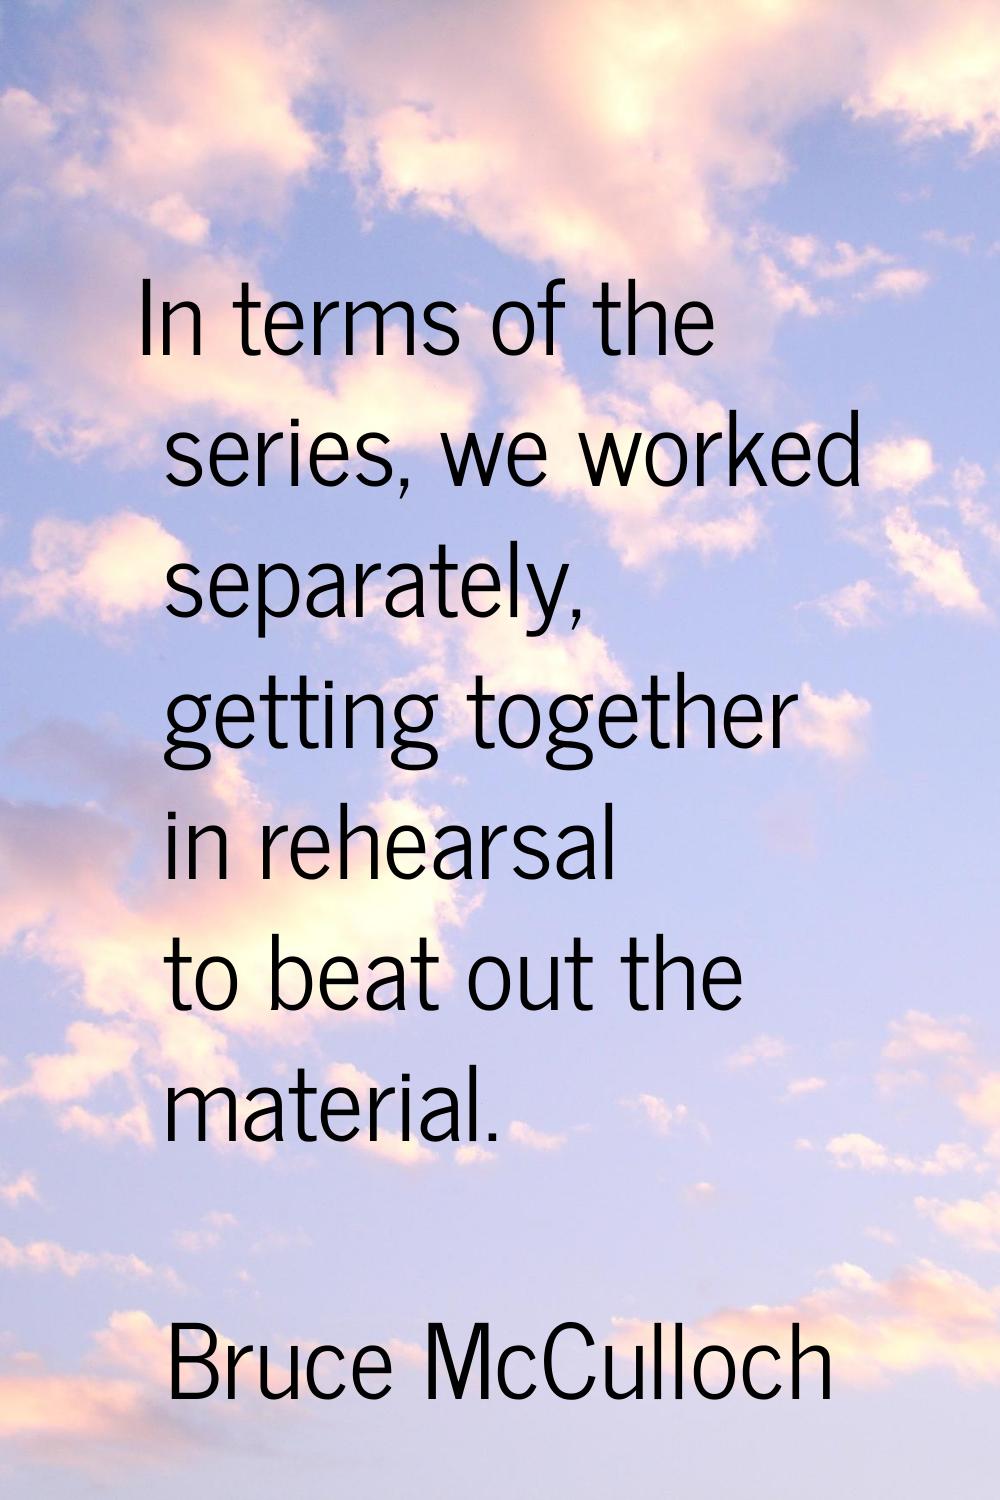 In terms of the series, we worked separately, getting together in rehearsal to beat out the materia